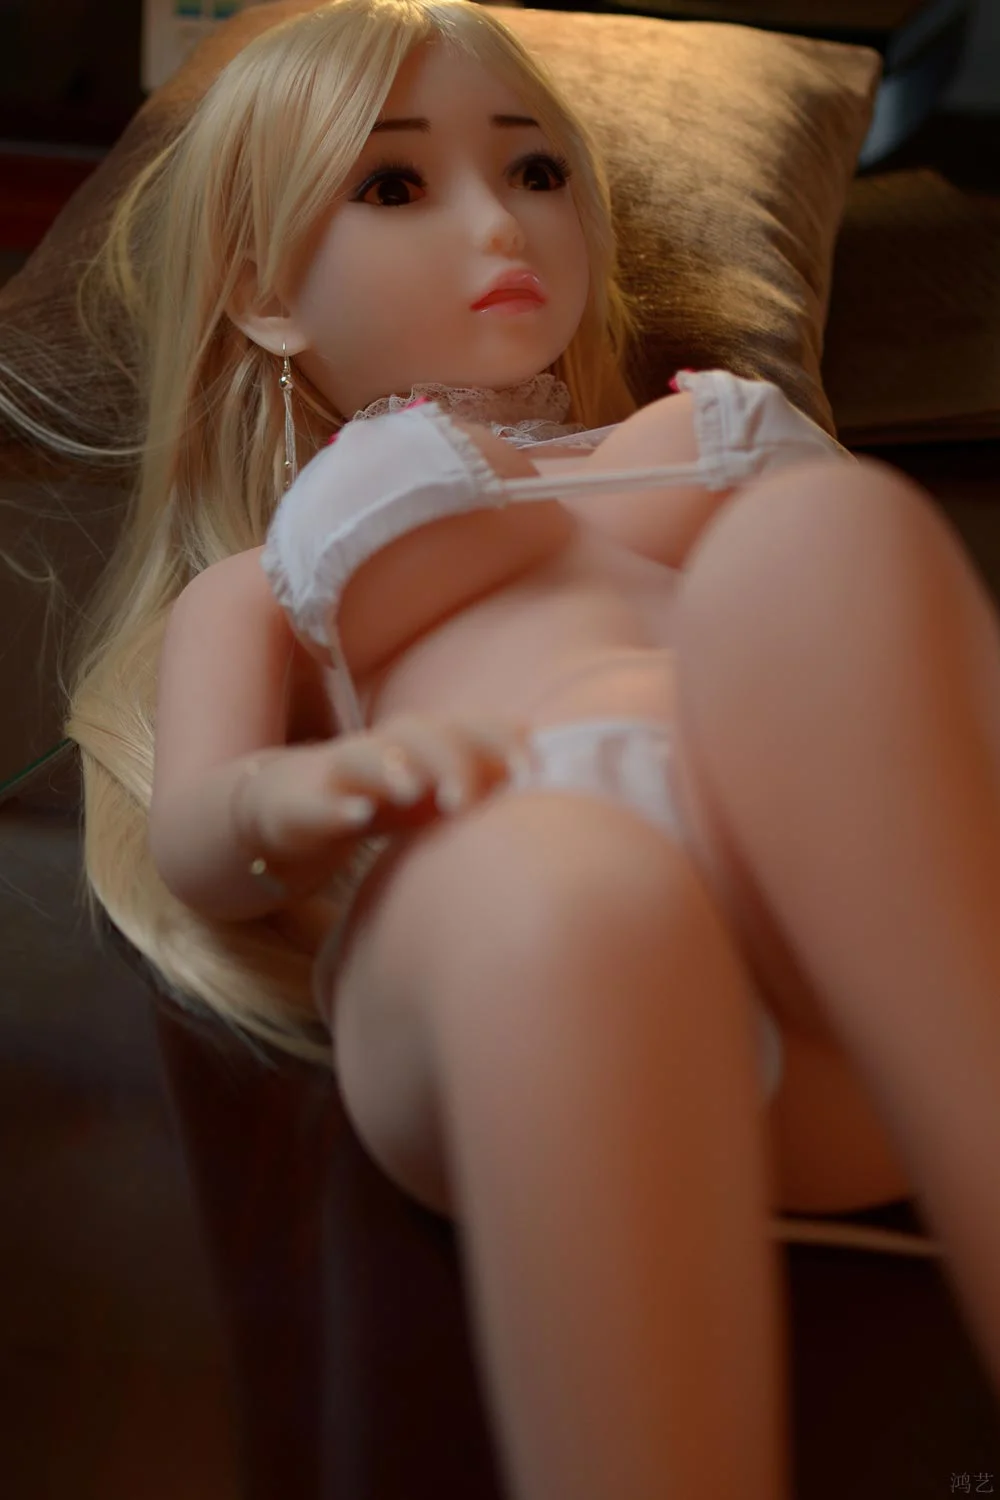 Mini sex doll lying on the bed with hands on thighs